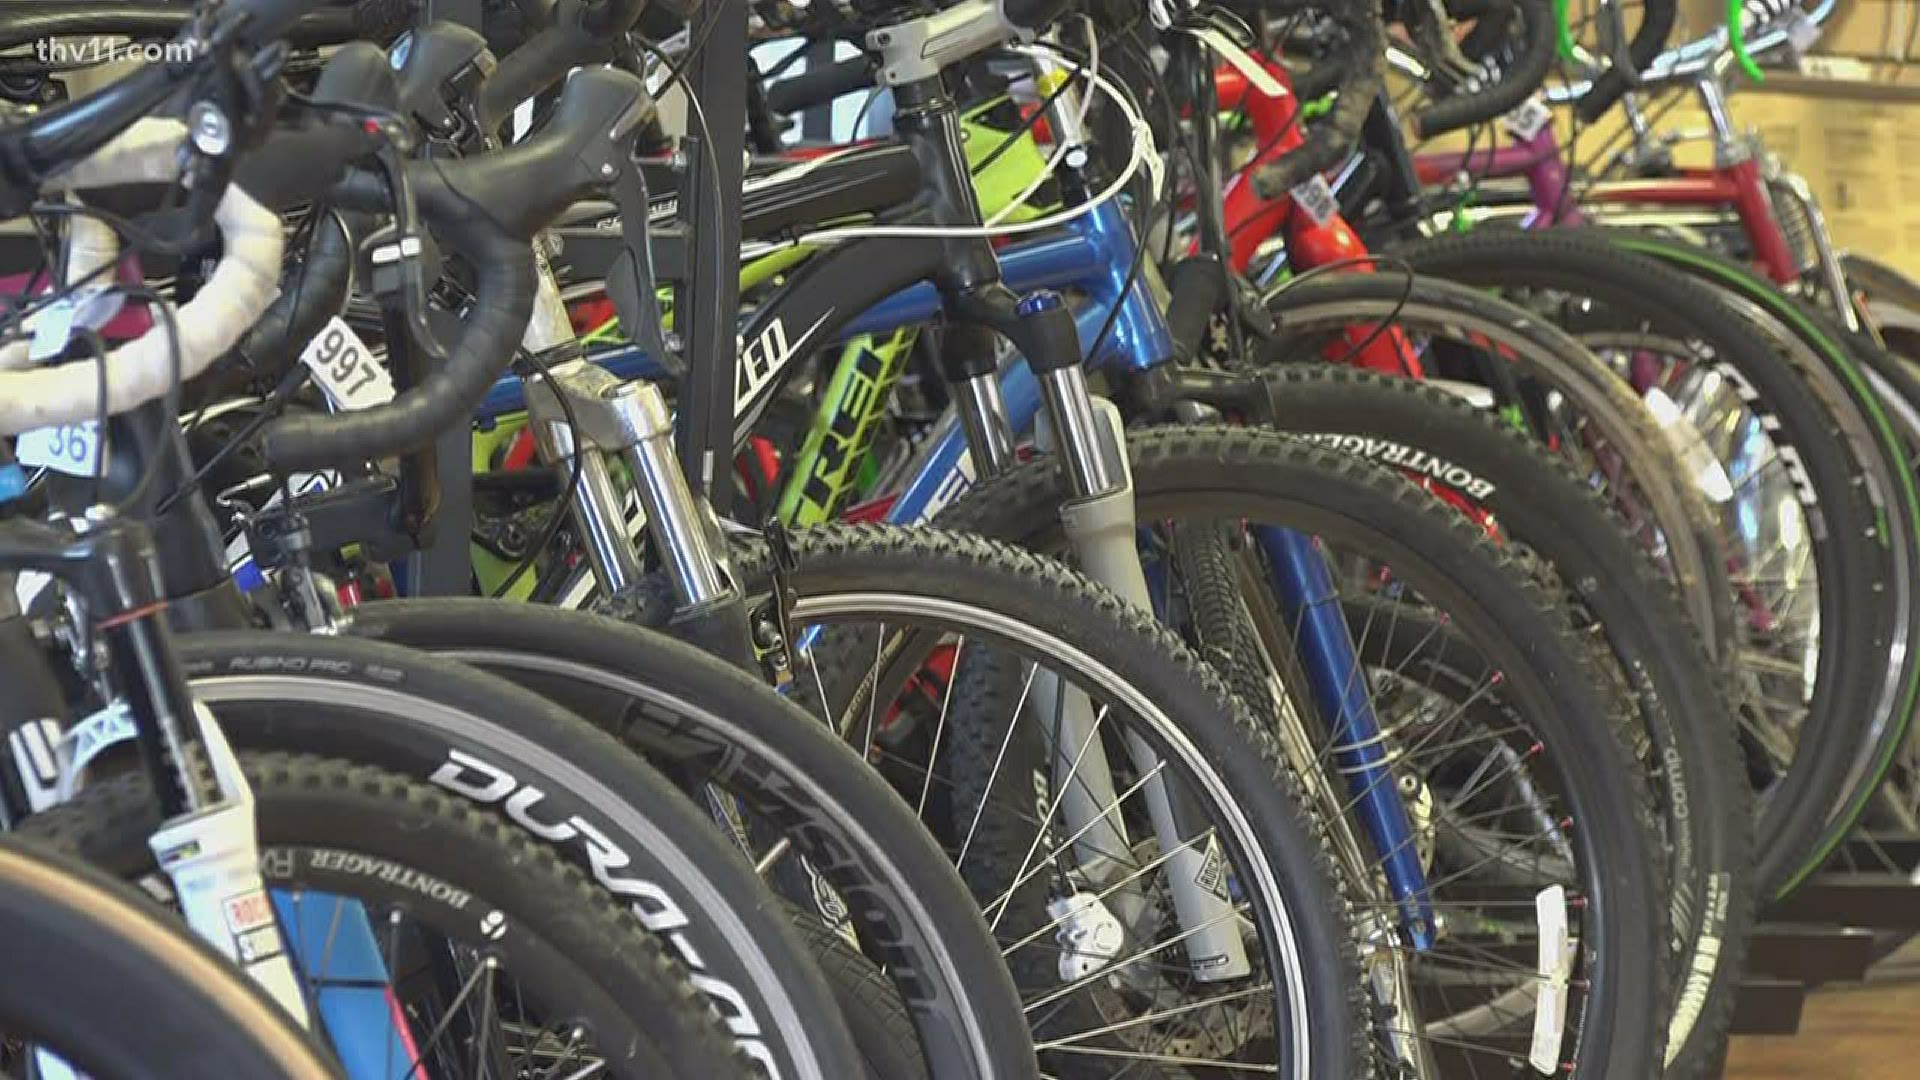 While many businesses have struggled during the coronavirus pandemic, bicycle shops are seeing sales unlike ever before.